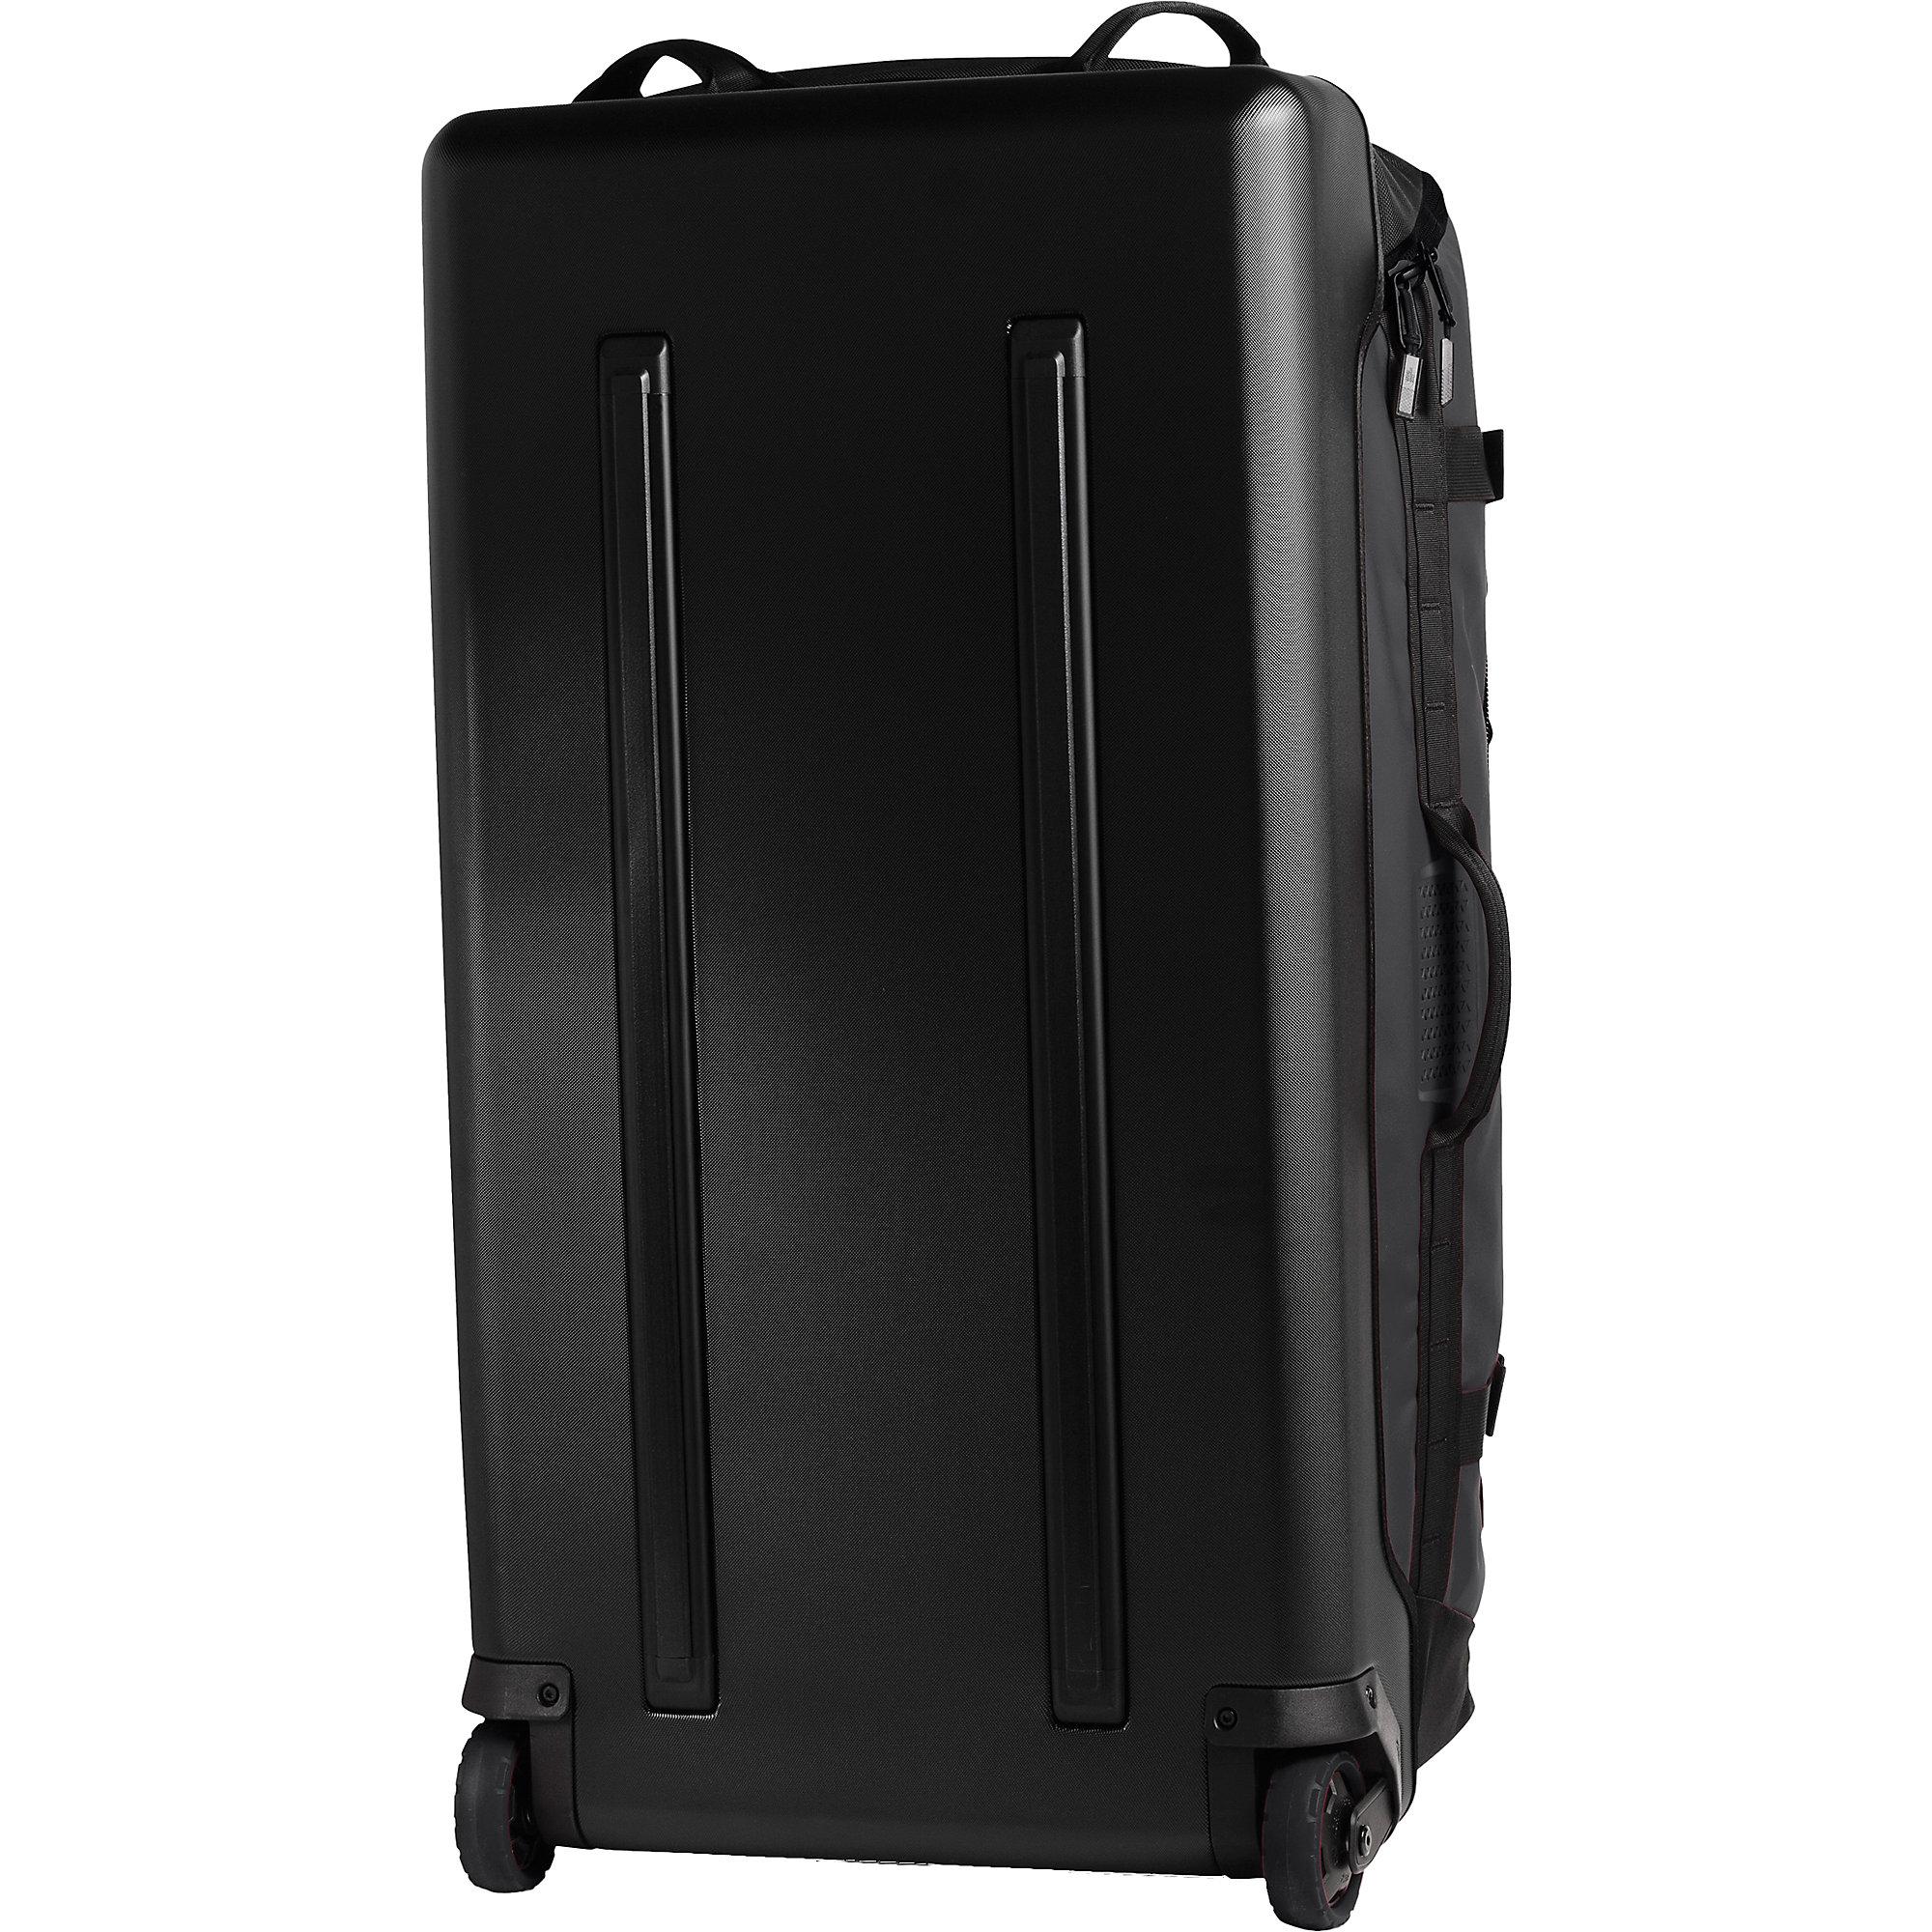 North Face Synthetic Maleta Suitcase 